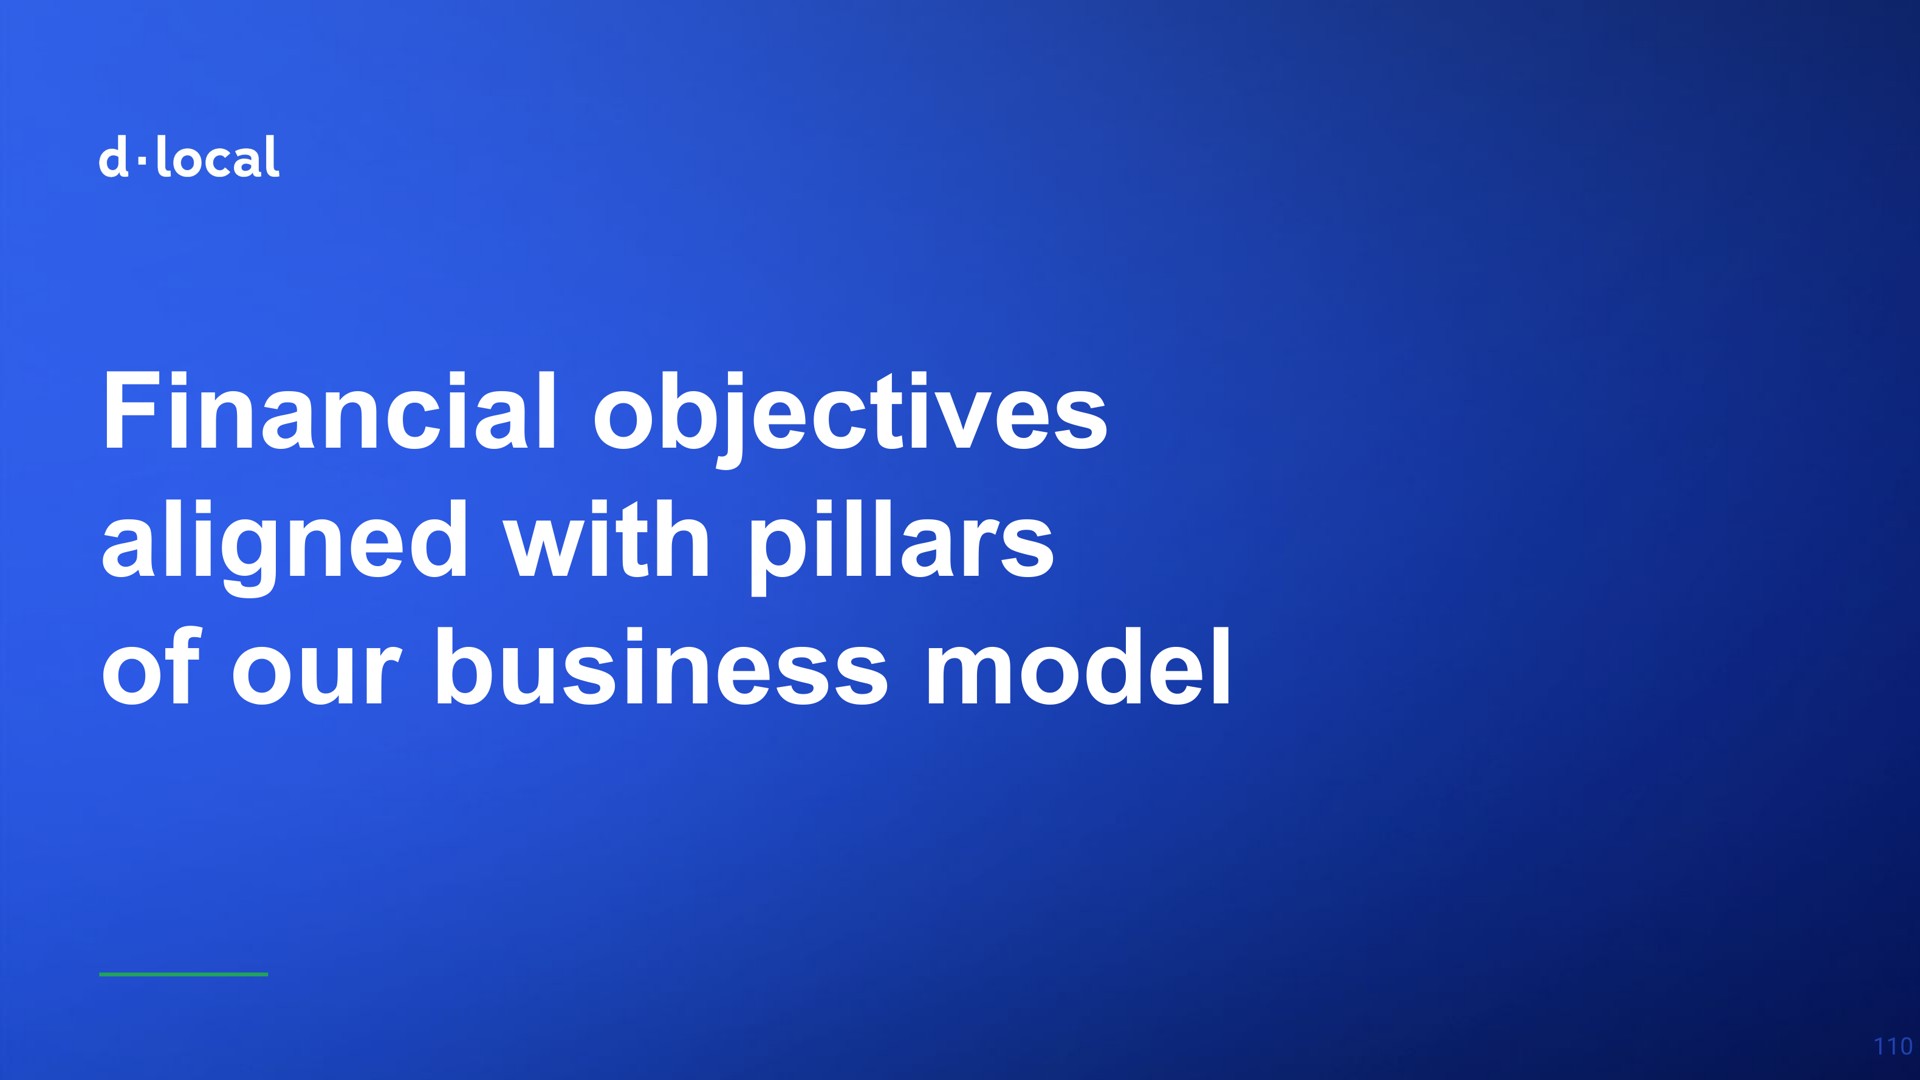 financial objectives aligned with pillars of our business model local | dLocal